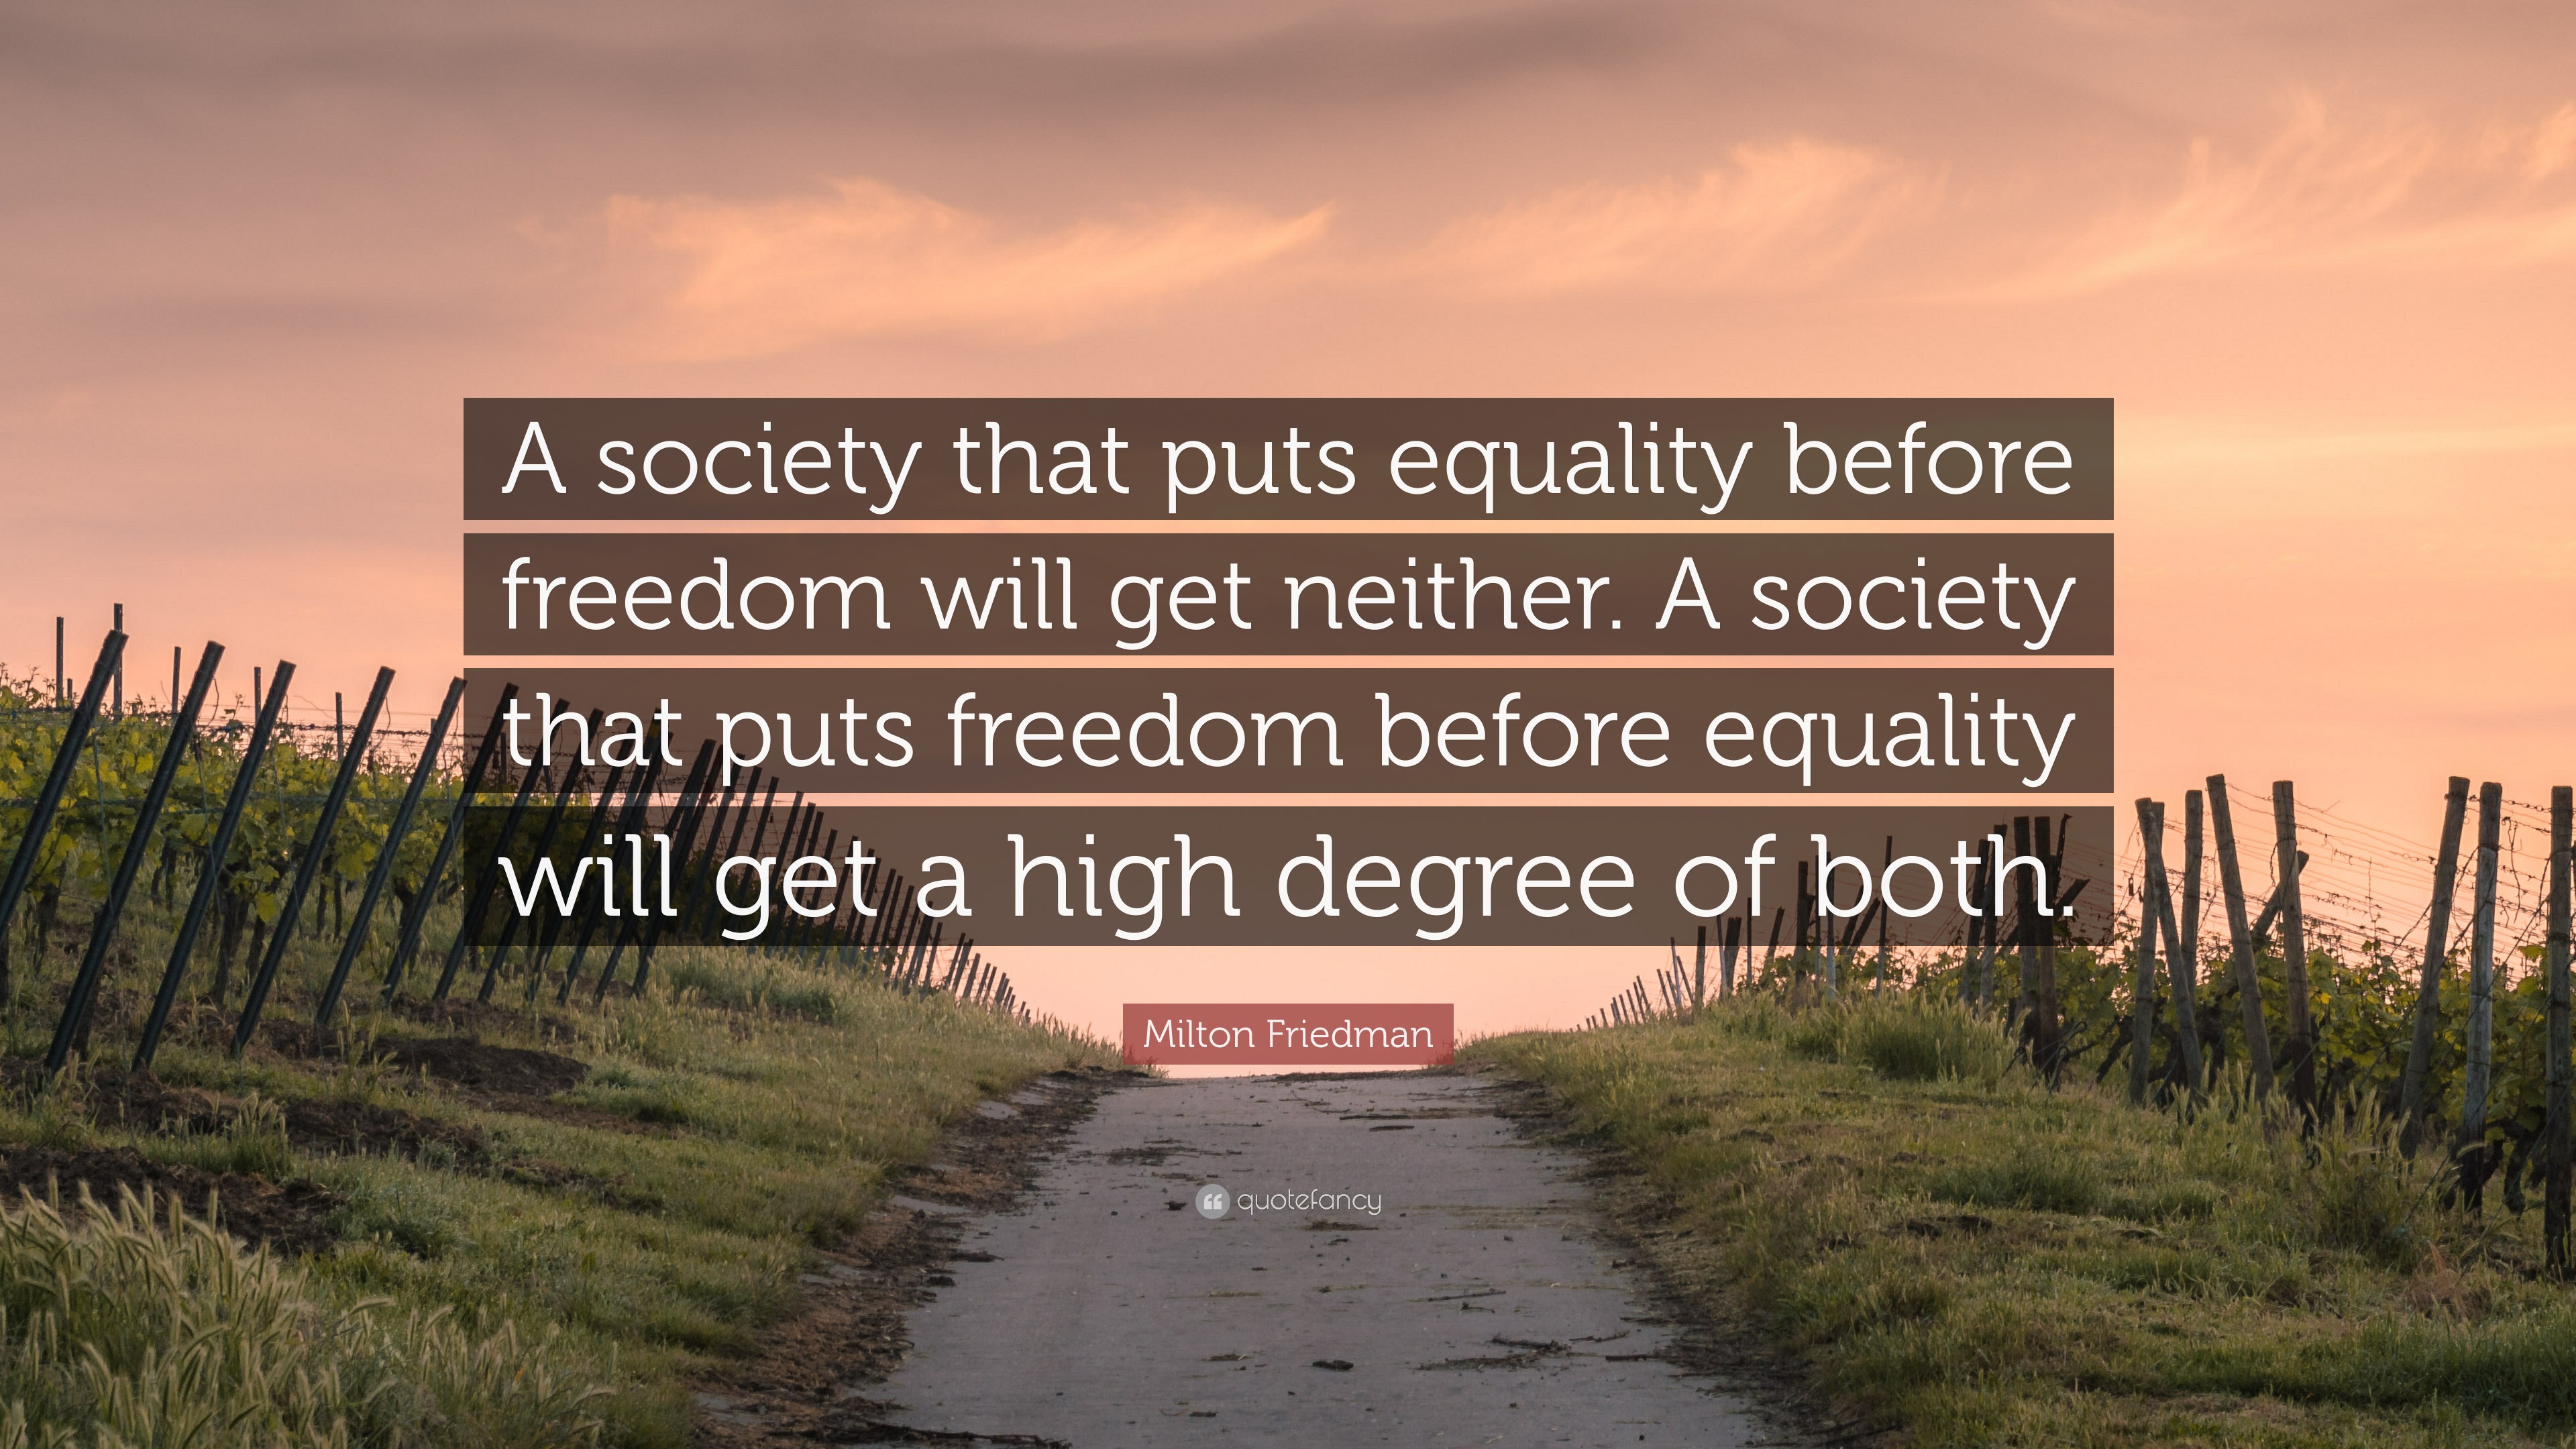 Milton Friedman Quote “A society that puts equality